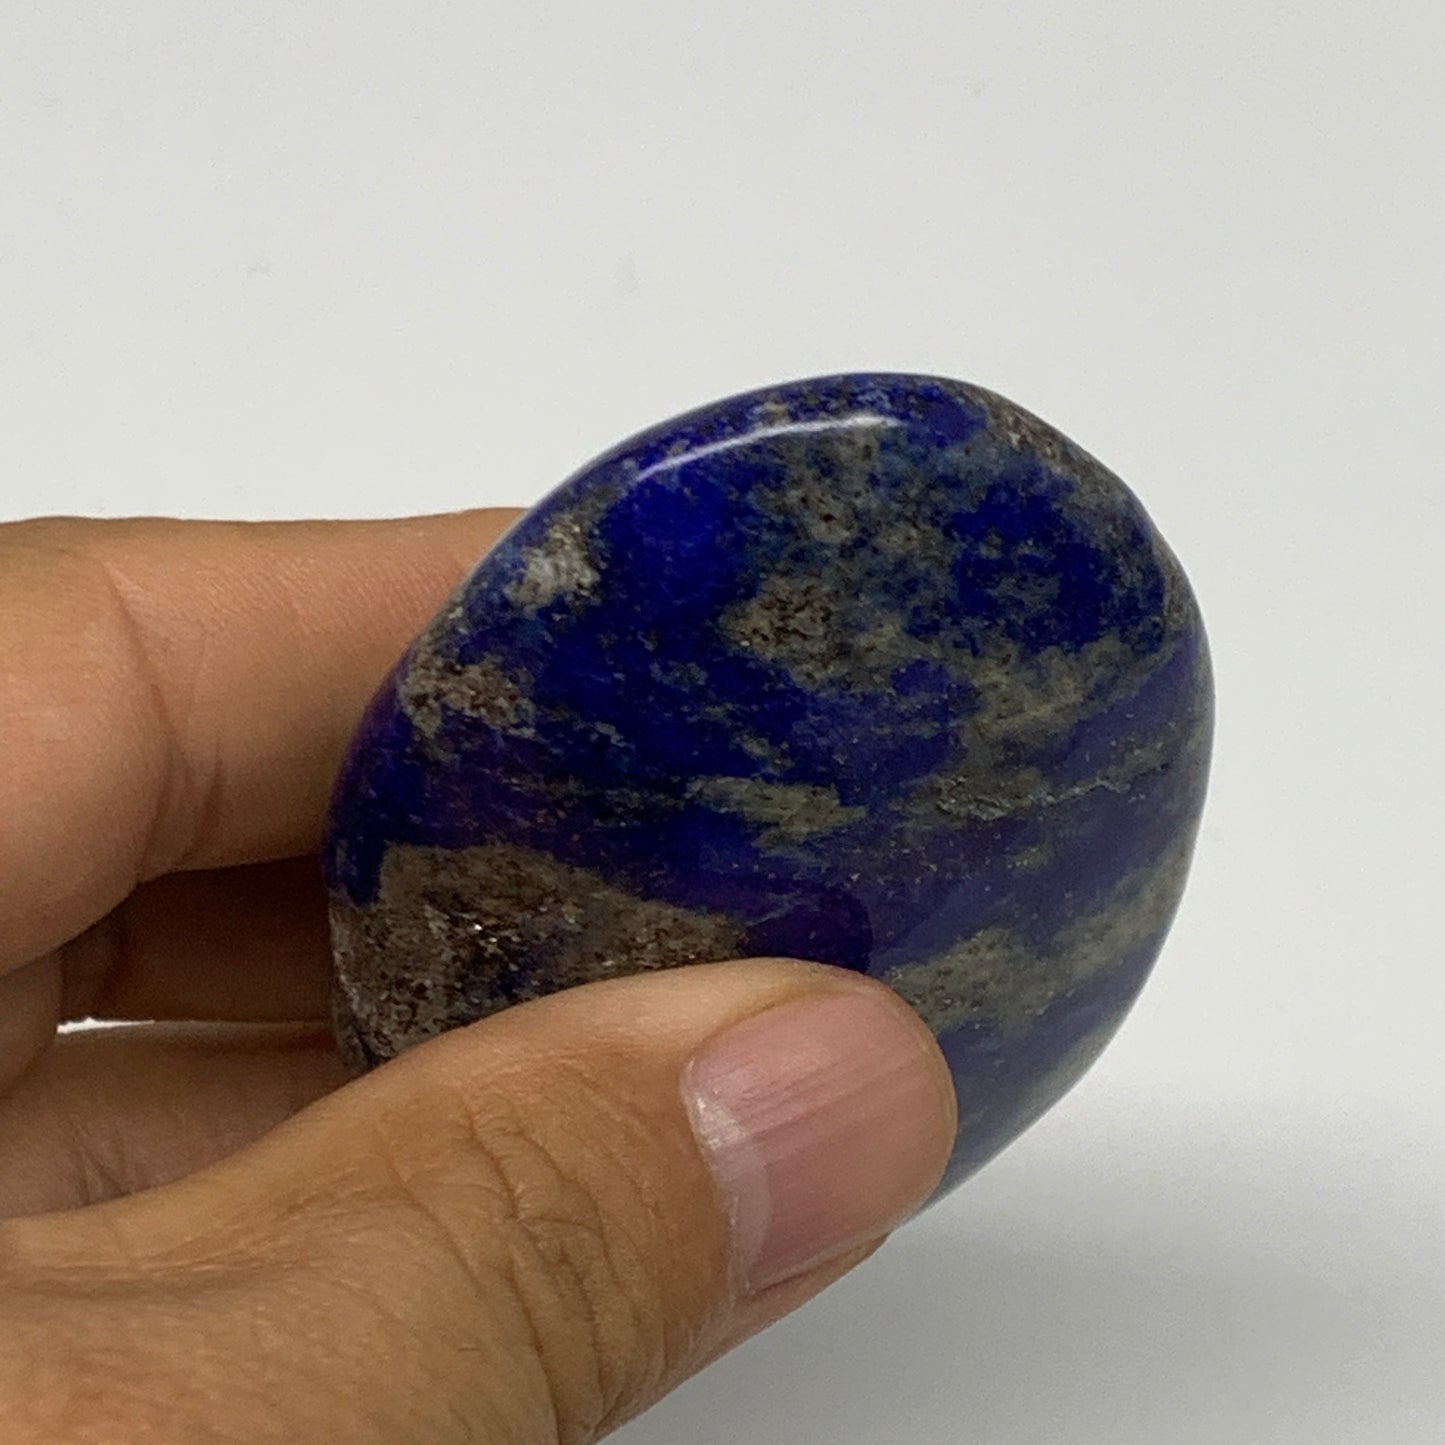 93.8g,2.8"x1.8"x0.7", Natural Lapis Lazuli Palm Stone from Afghanistan,B23185